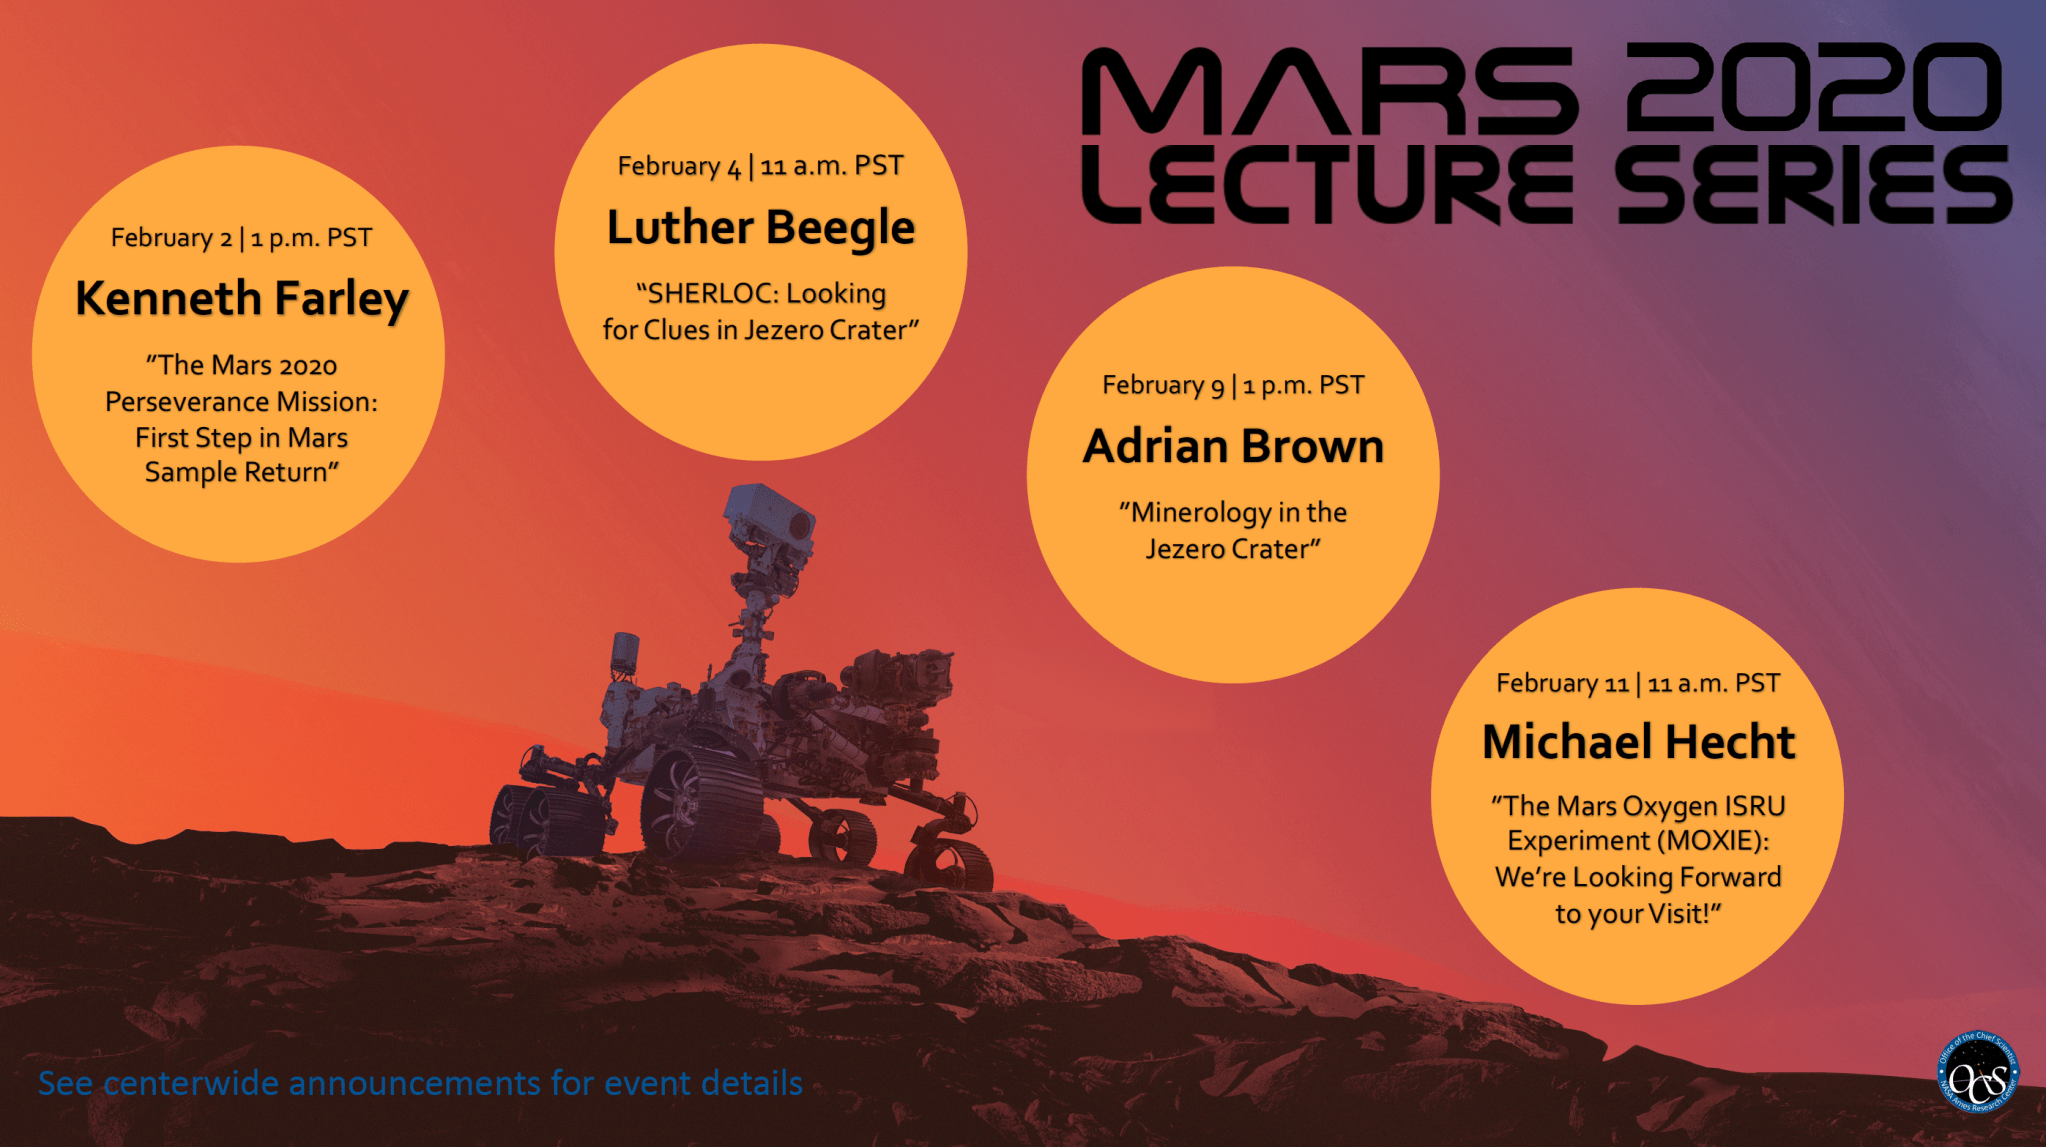 Mars 2020 Event Lecture Series